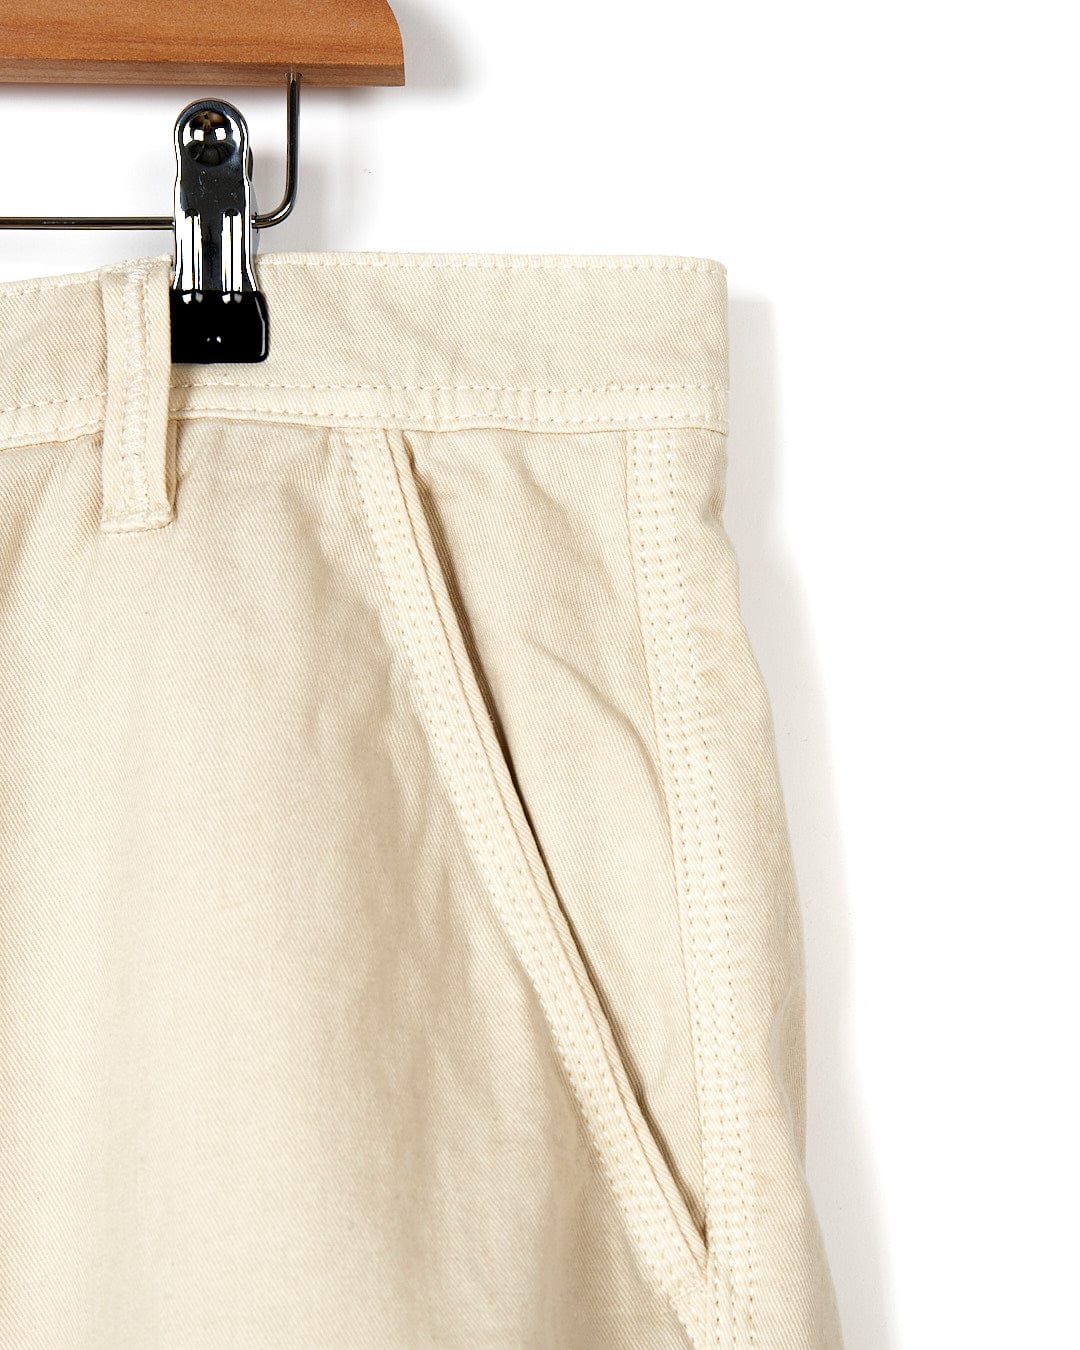 A pair of Sennen - Mens Chino Shorts - Natural hanging on a wooden hanger. (Brand: Saltrock)